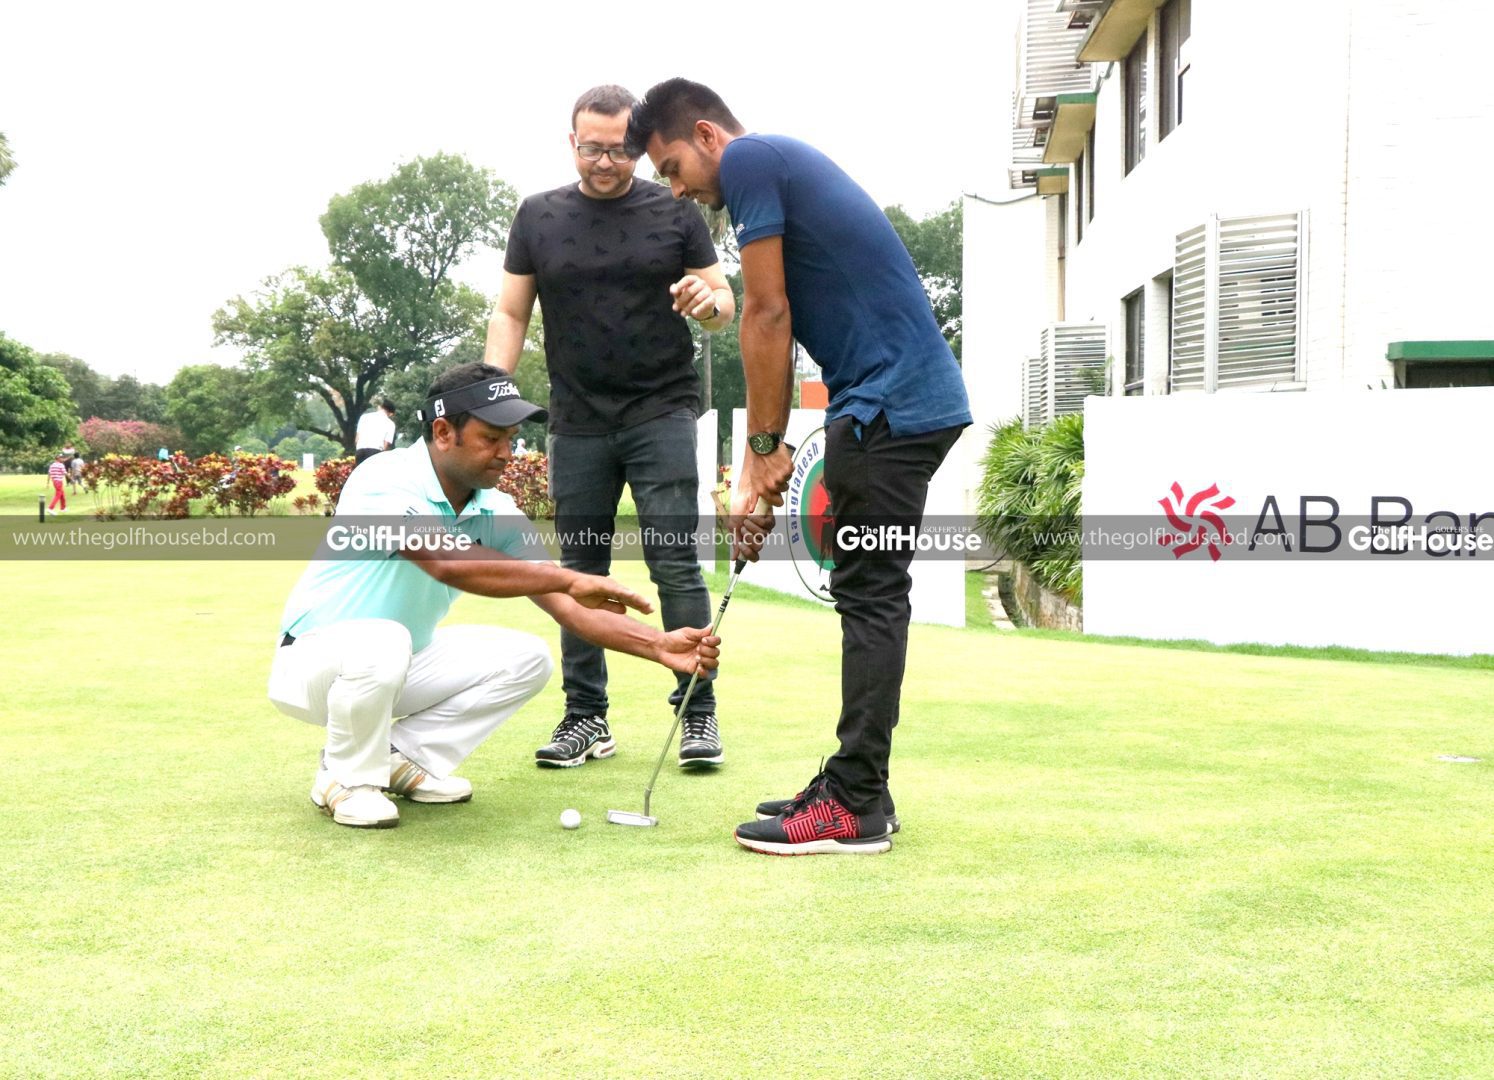 This_is_not_a_scene_from_shooting_of_a_cinema_or_drama_The_Asian_Tour_brought_two_stars_from_two_different_worlds_to_the_Kurmitola_Golf_Club_And_they_became_devoted_students_of_star_golfer_Siddikur_Rahman.